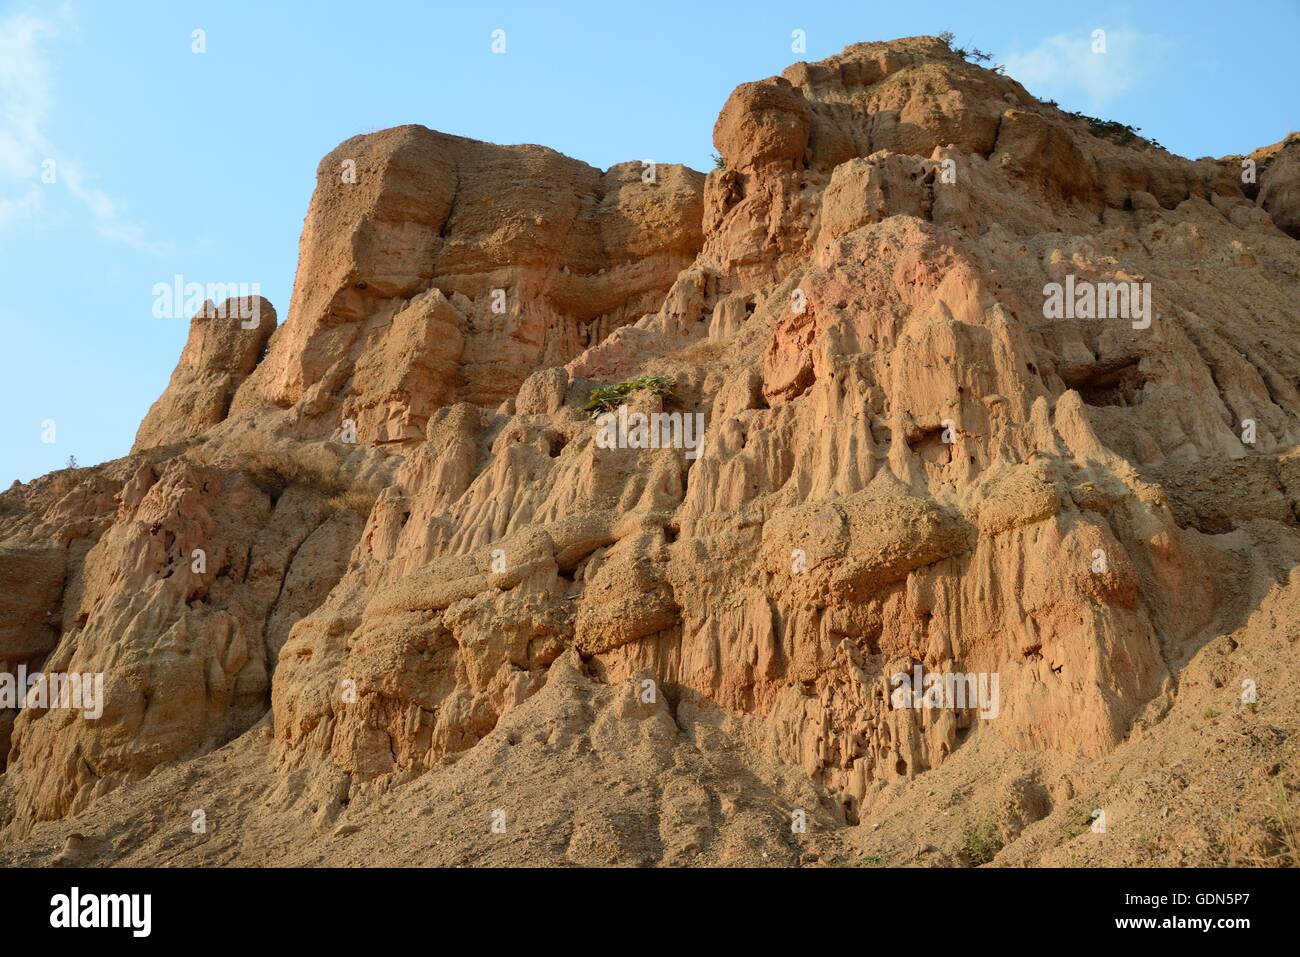 Heavily eroded, weathered soft sandstone / conglomerate cliffs, near Foca, Bosnia and Herzegovina, July. Stock Photo